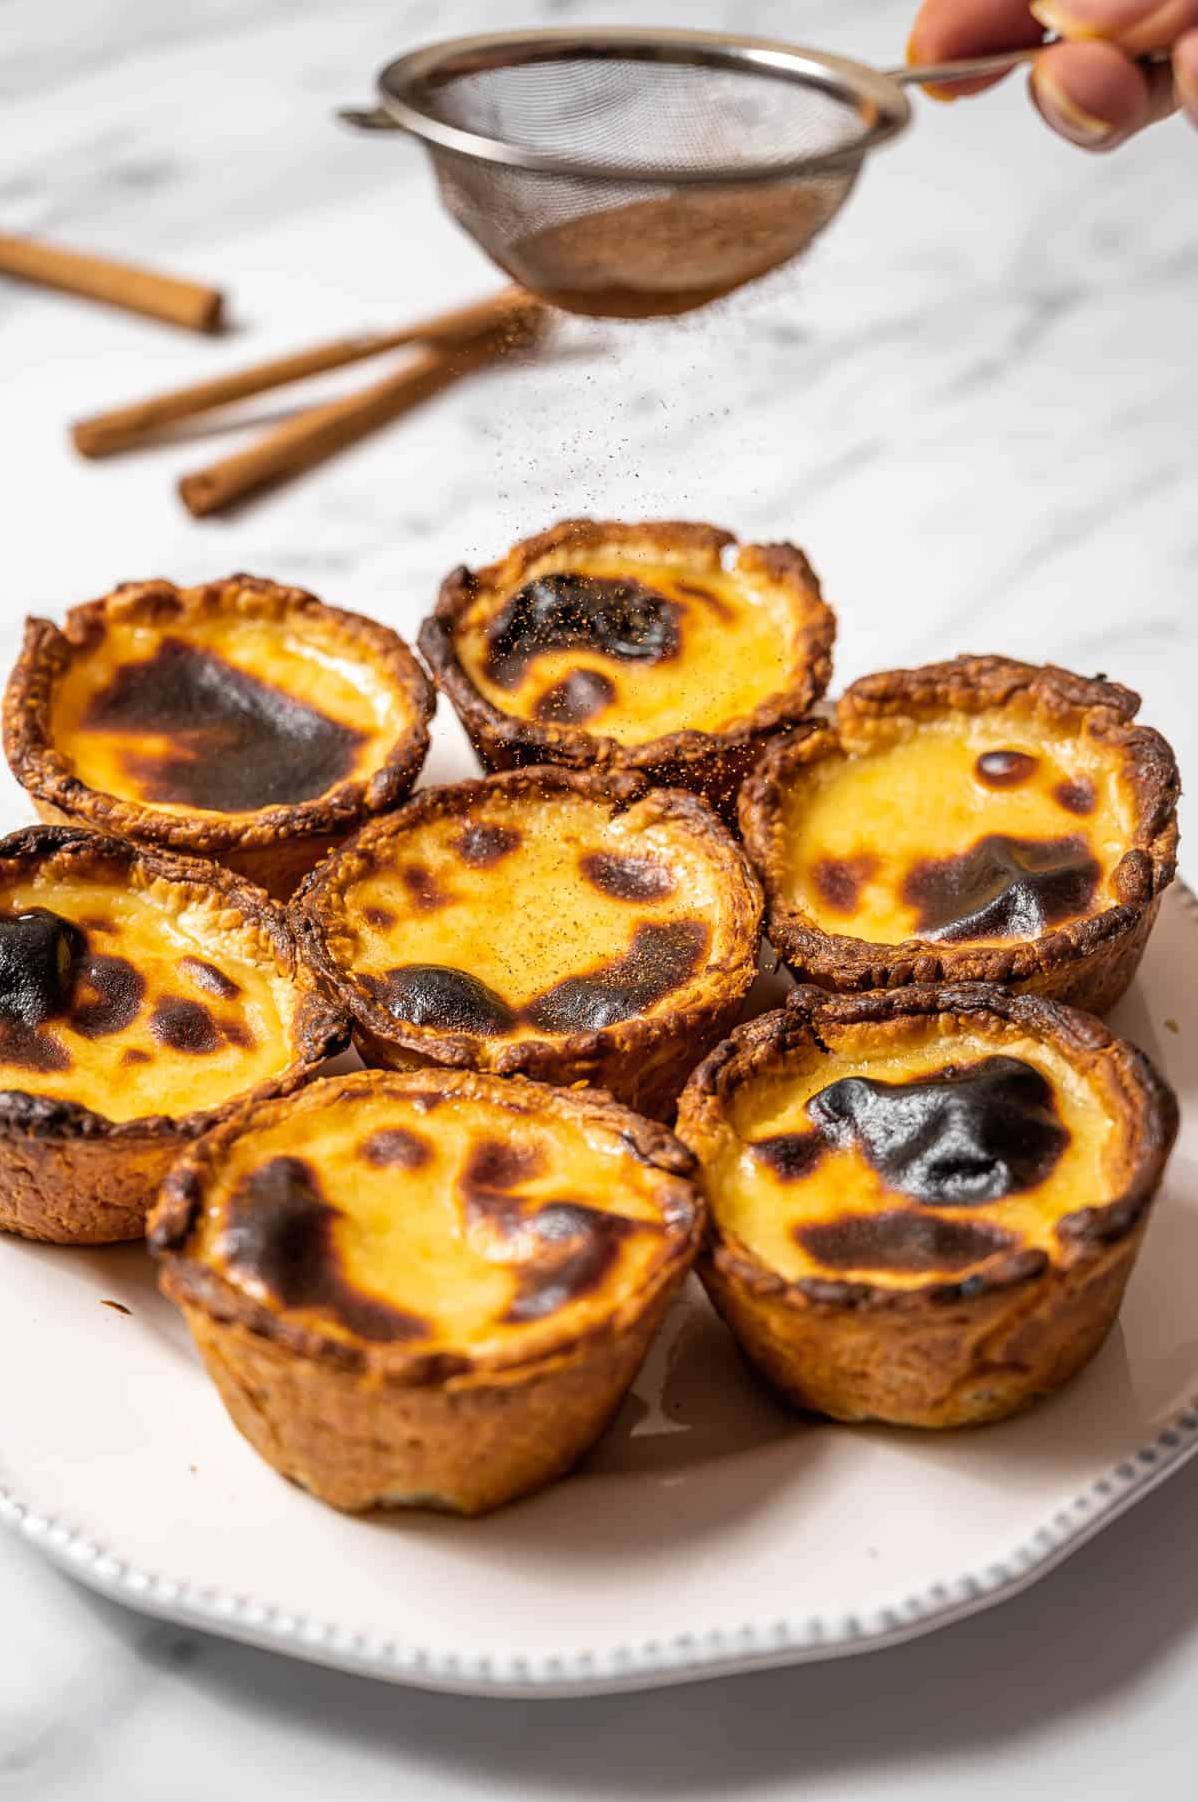  One bite of these baked custard cups and you'll be in pastry heaven.